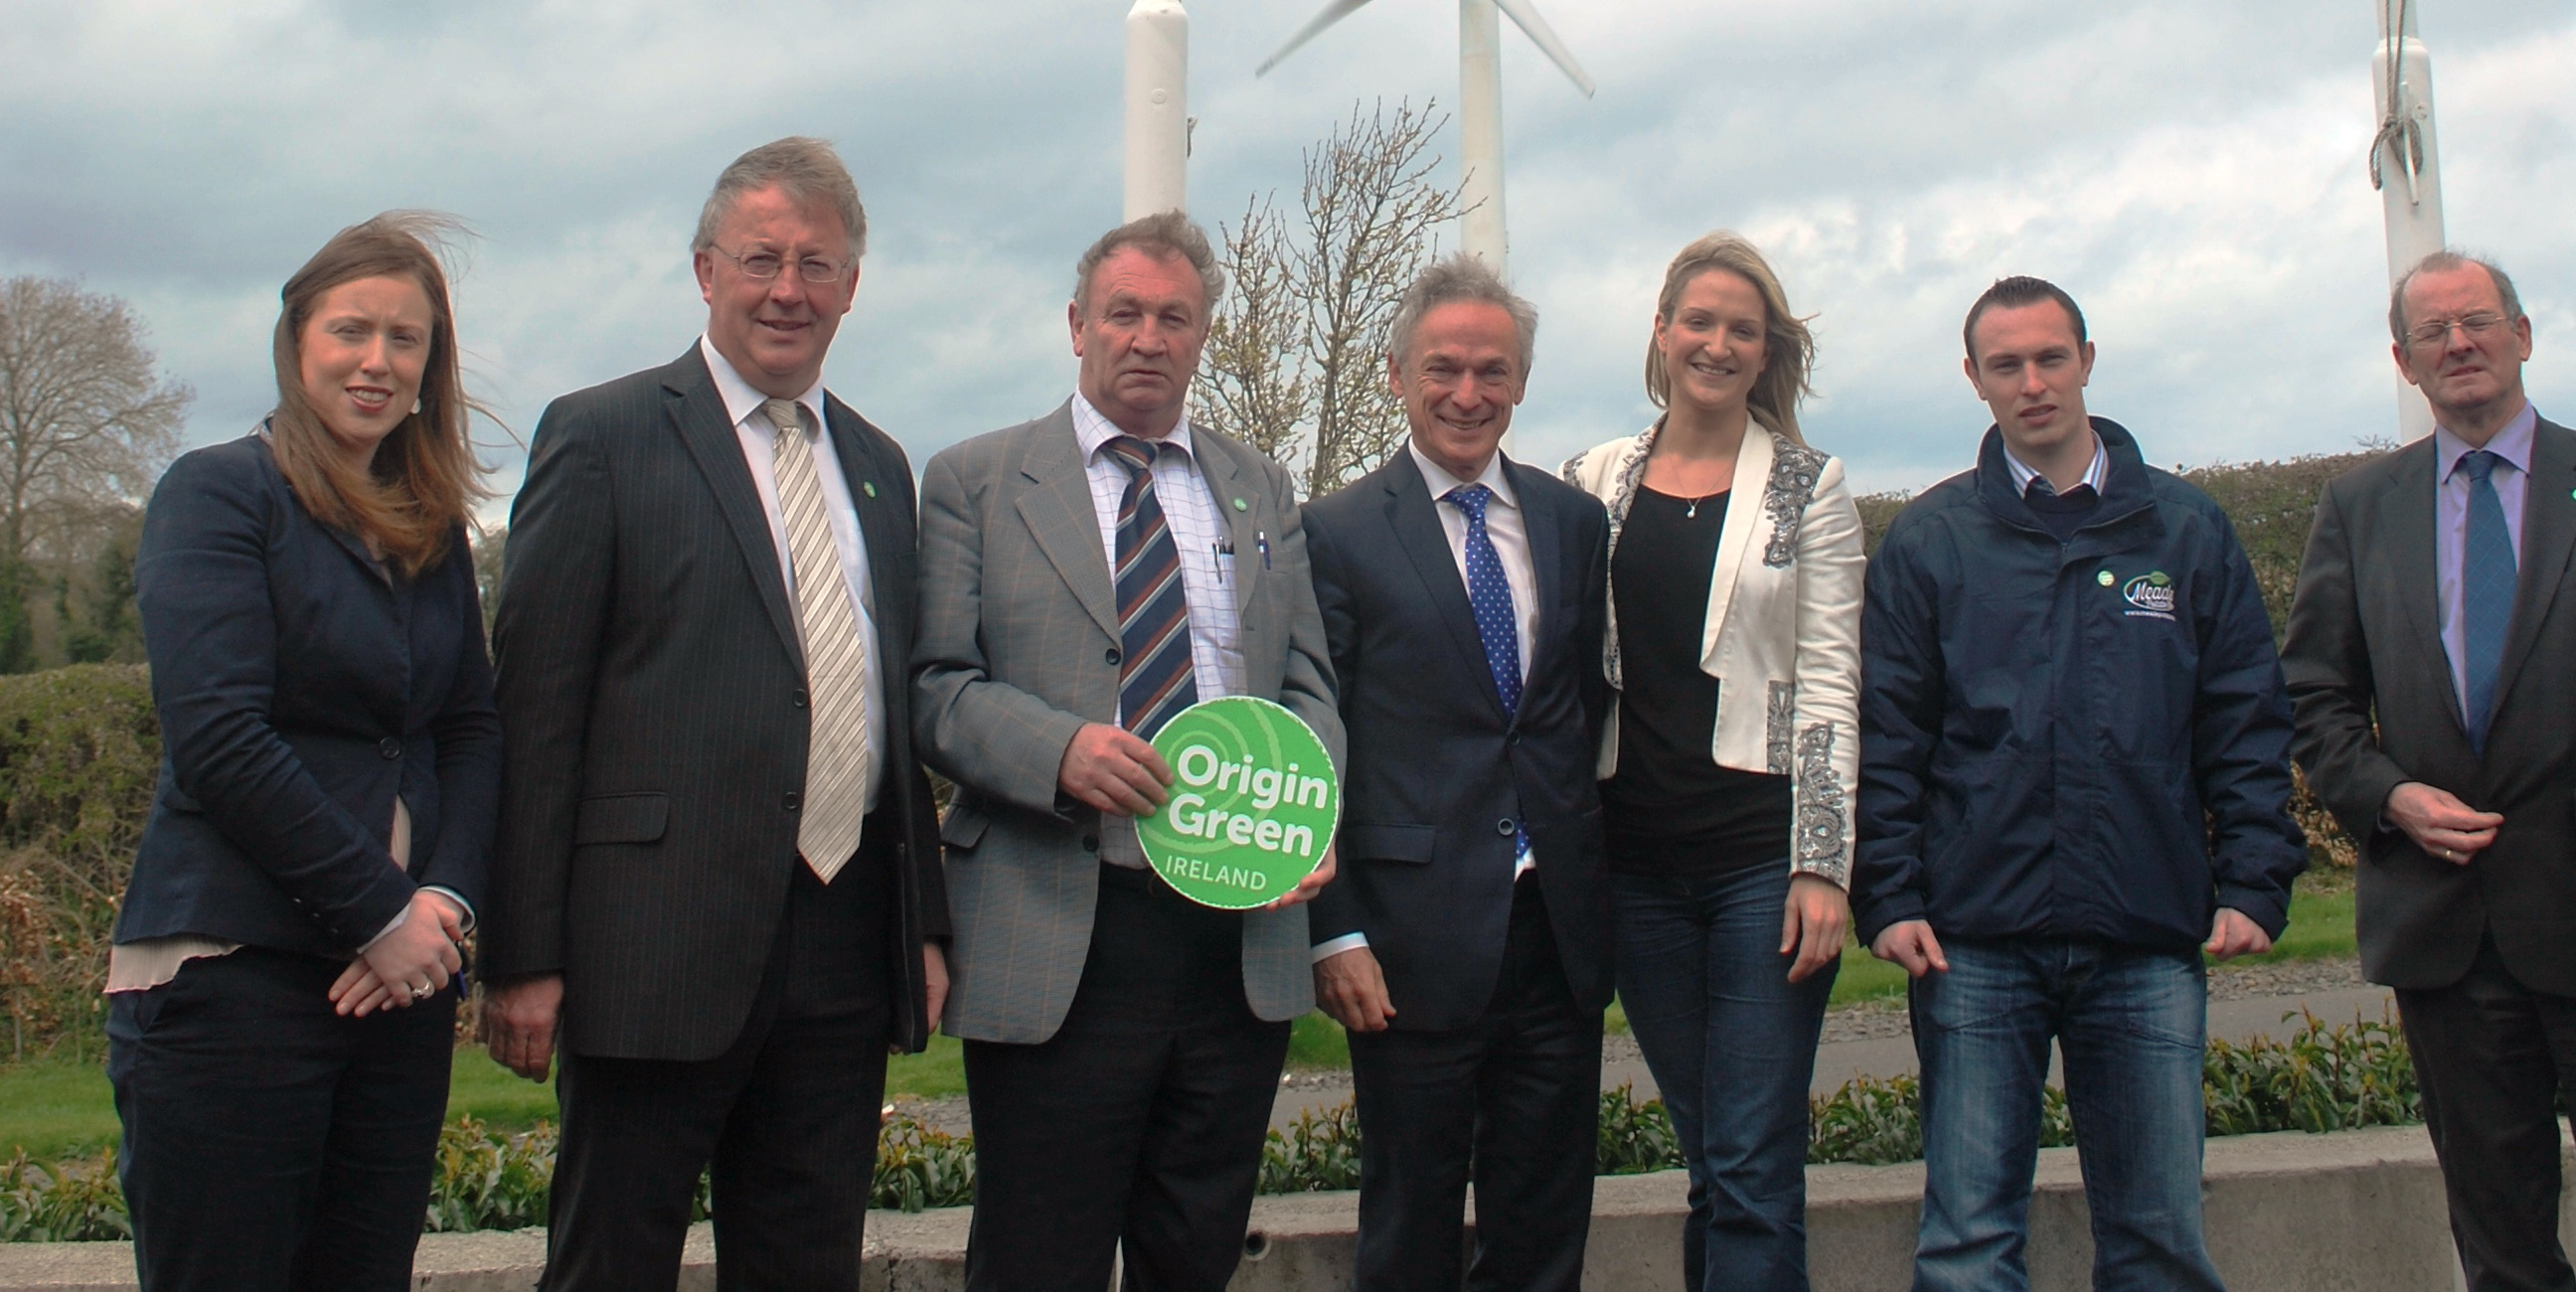 Eleanor Meade; Lorcan Bourke of Bord Bia; Philip Meade Sr.; Minister Richard Bruton, TD, Minister of Jobs, Enterprise and Innovation; Helen McEntee TD; Philip Meade Jr. and Gabriel Rowe, Department of Agriculture gather together following Minister Bruton’s raising of the Origin Green flag on Monday 13th April to mark the Meade Potato Company’s acceptance as full members of Origin Green, a sustainability certification programme